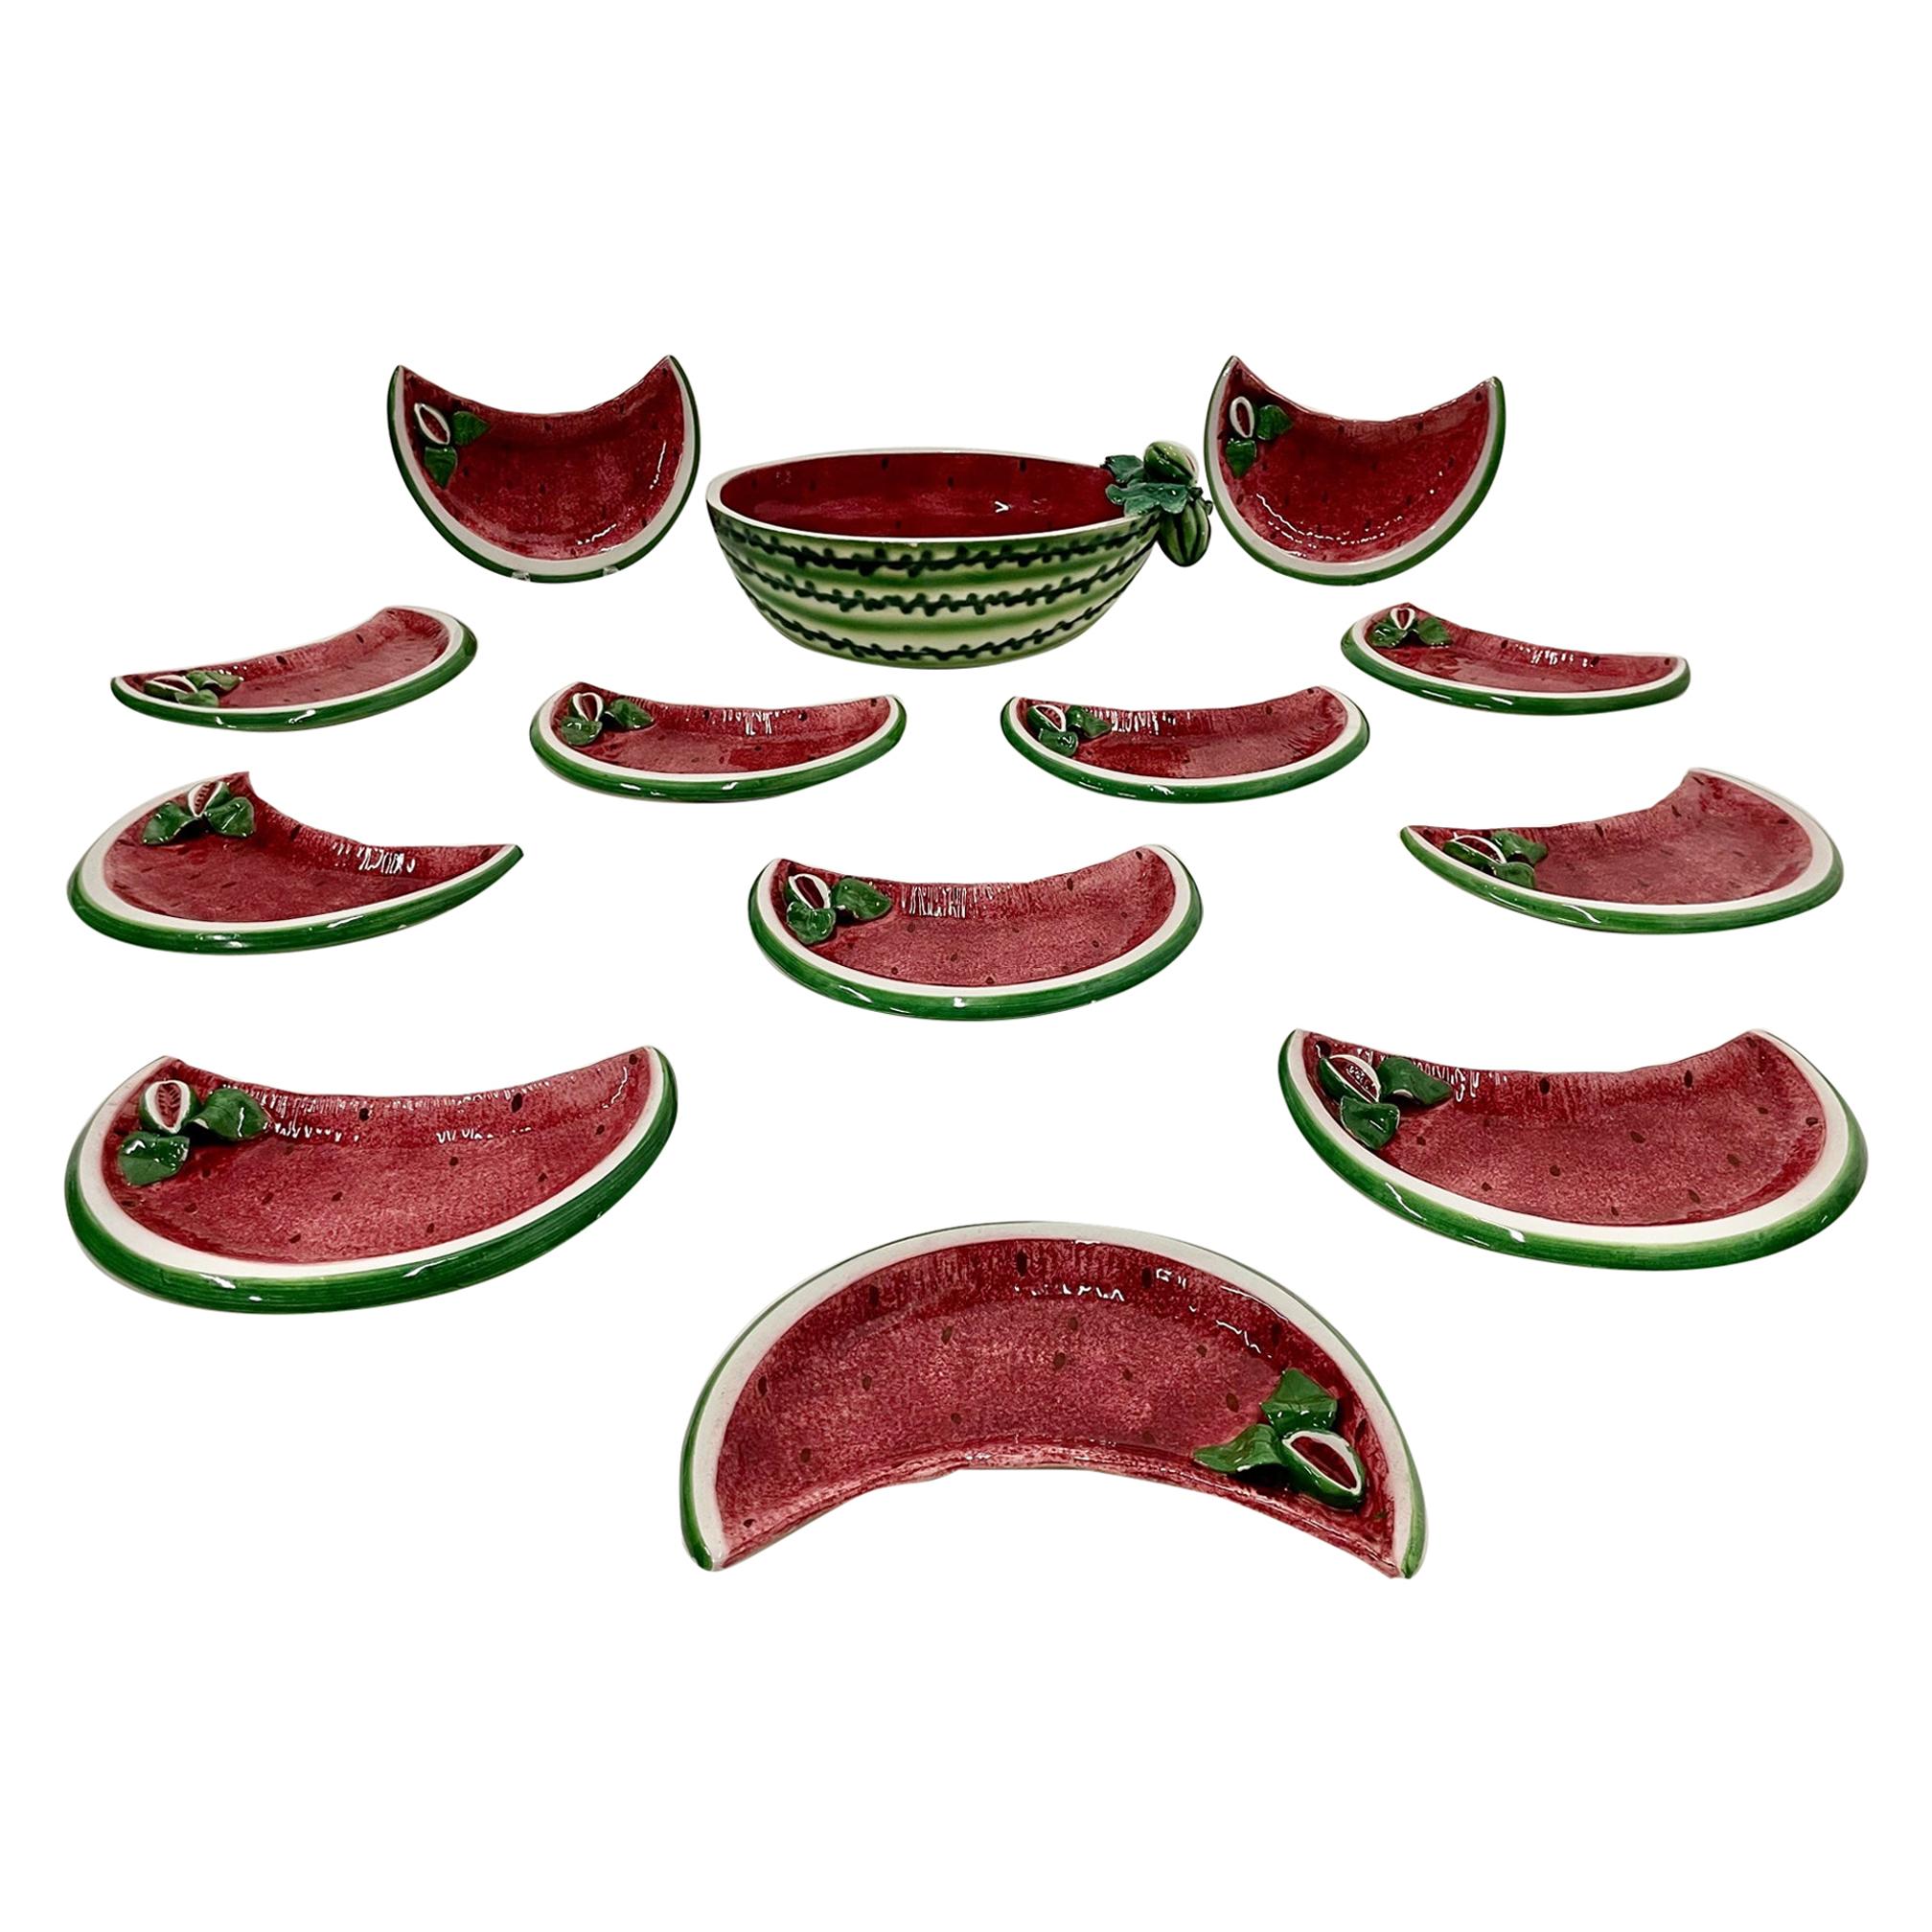 Juicy Set of 12 Watermelon Motife Italian Pottery Dishes and Serving Bowl For Sale